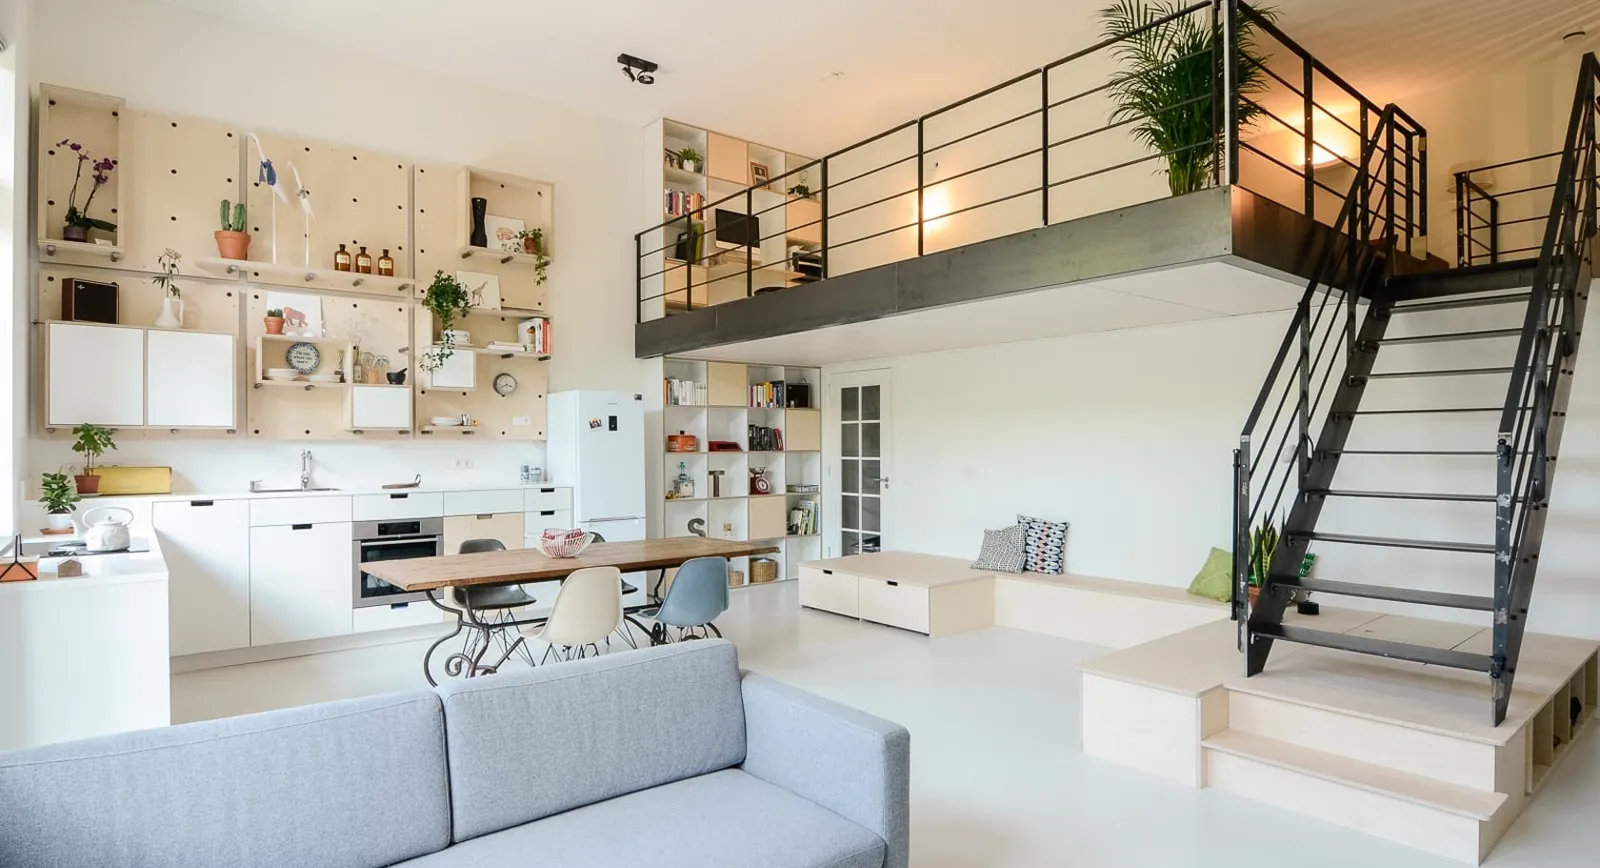 Micro flats famous in Amsterdam as house charges rise